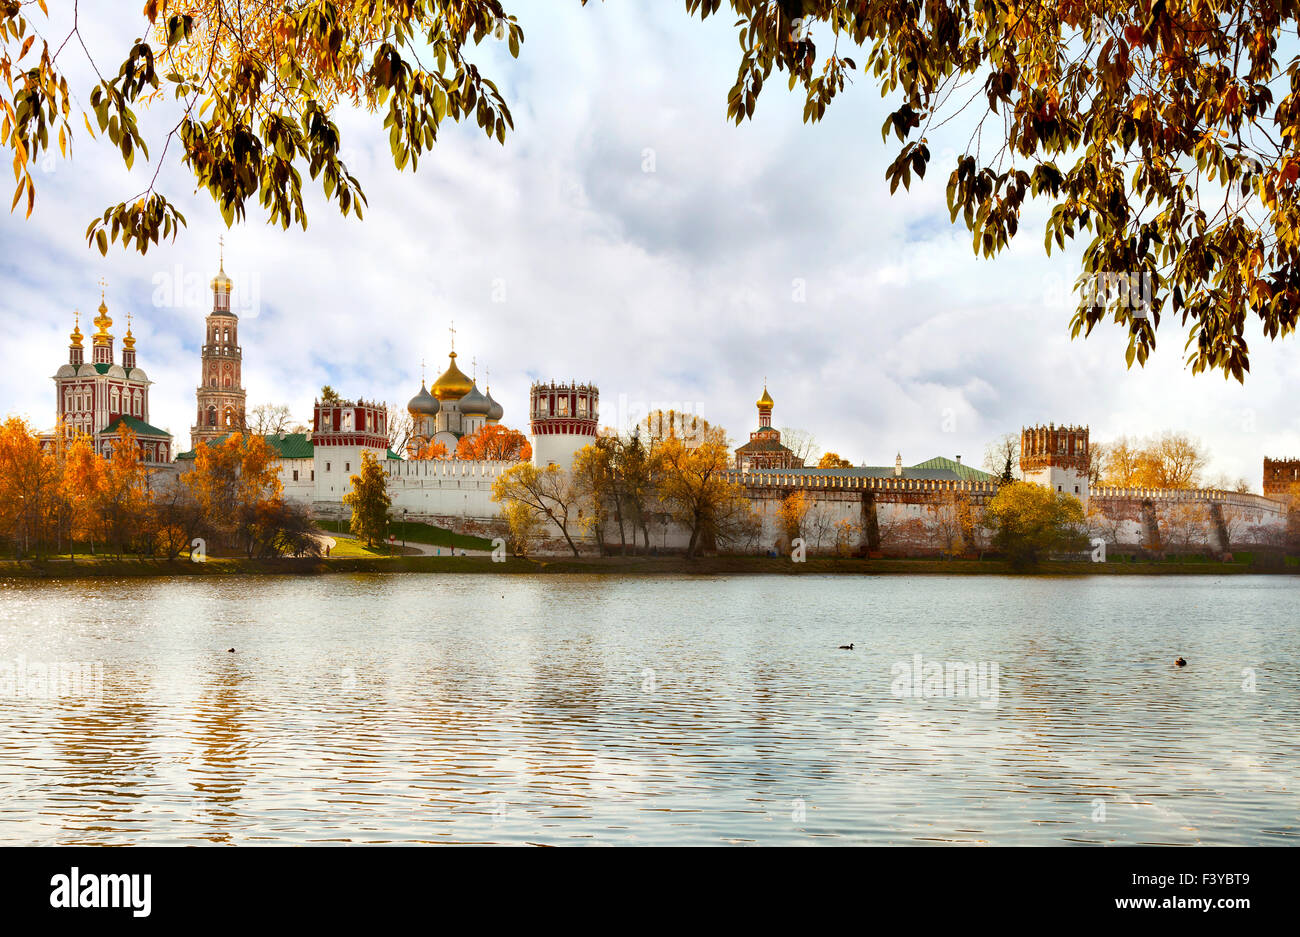 Novodevichiy Convent in Moscow, Russia Stock Photo